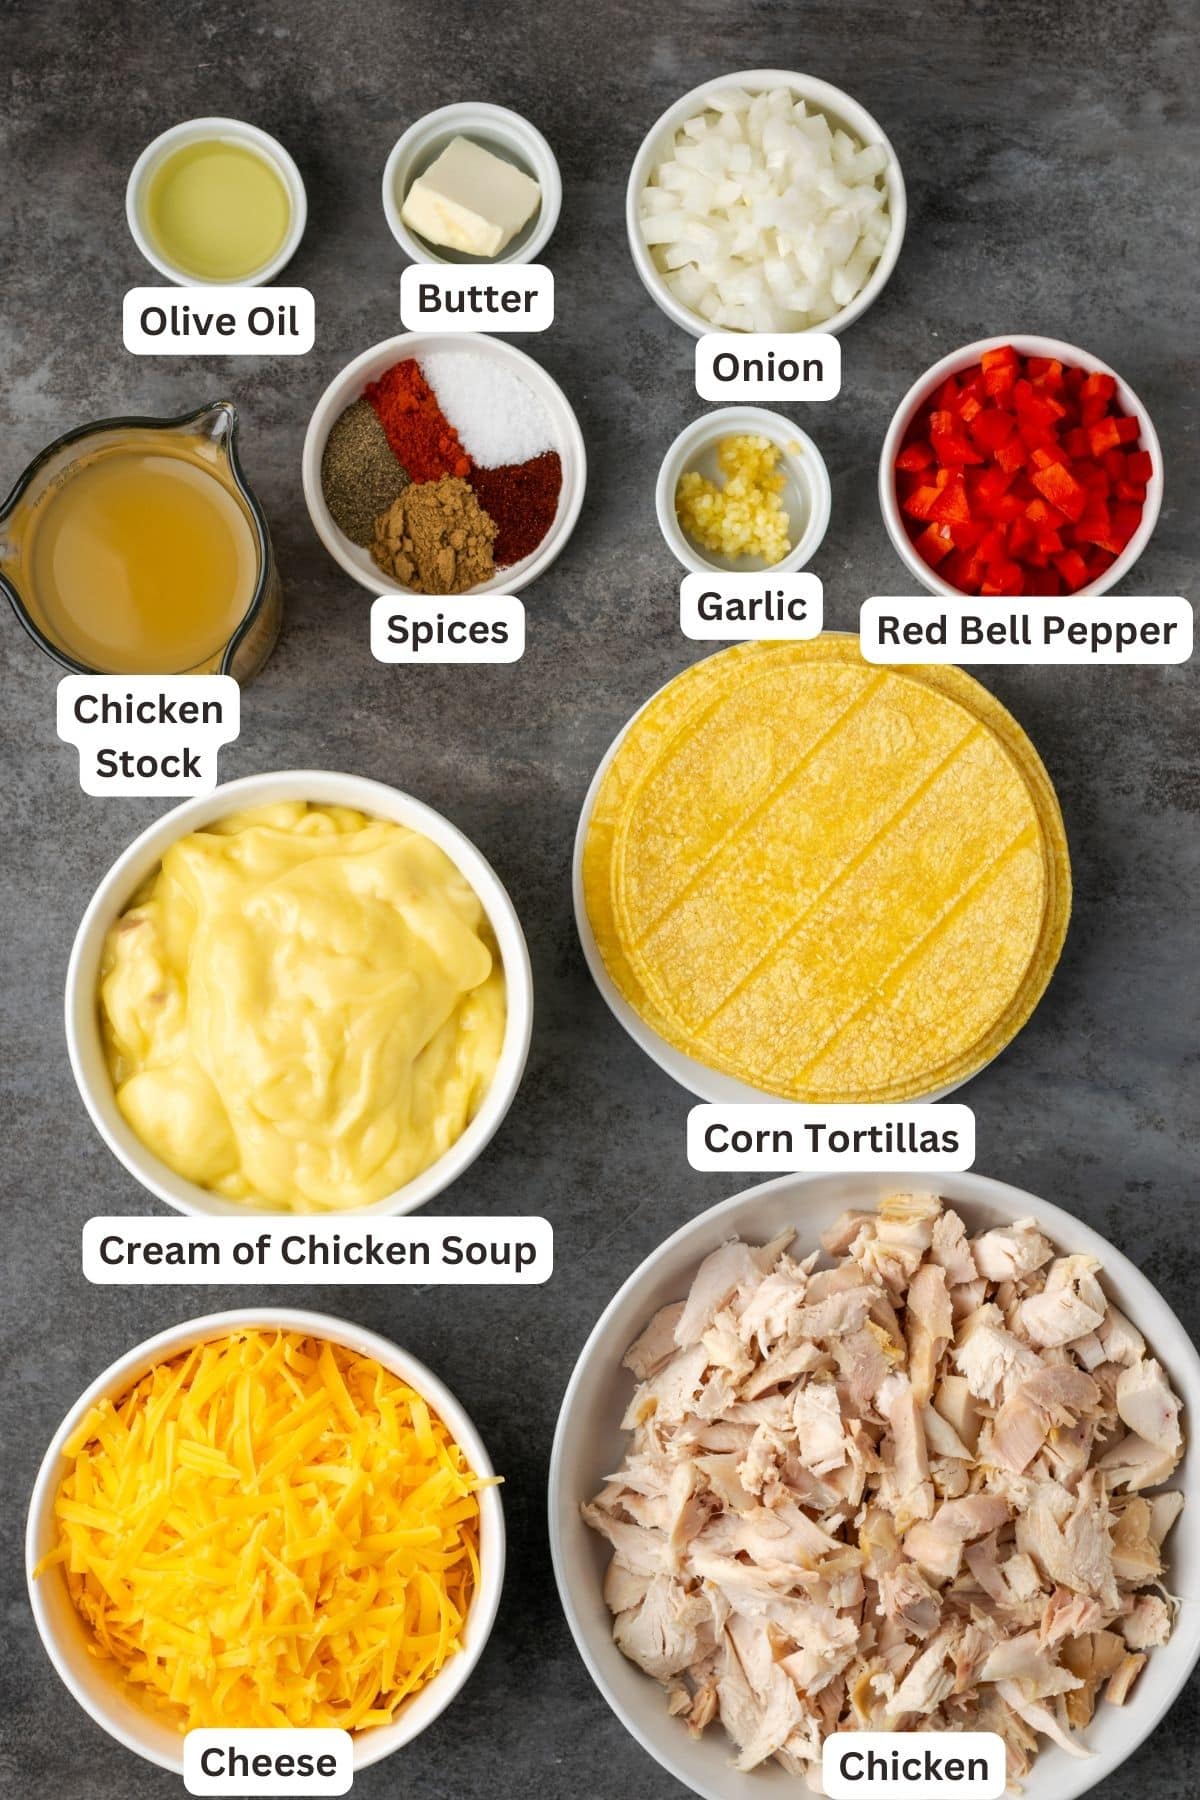 Ingredients for King Ranch chicken with text labels overlaying each ingredient.